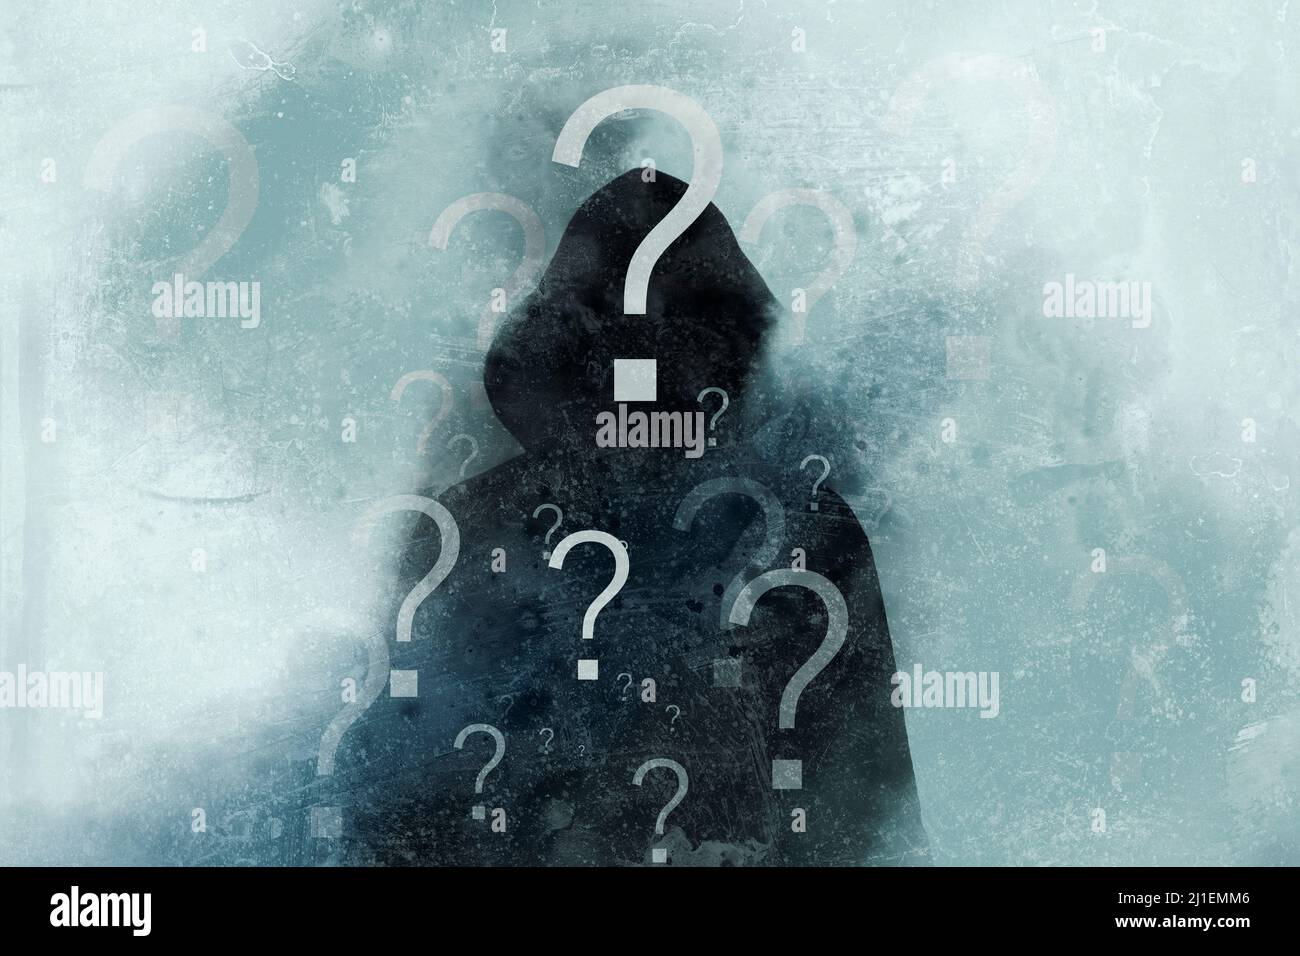 Choices and mental health concept of a hooded figure covered in question marks with a grunge, abstract edit Stock Photo